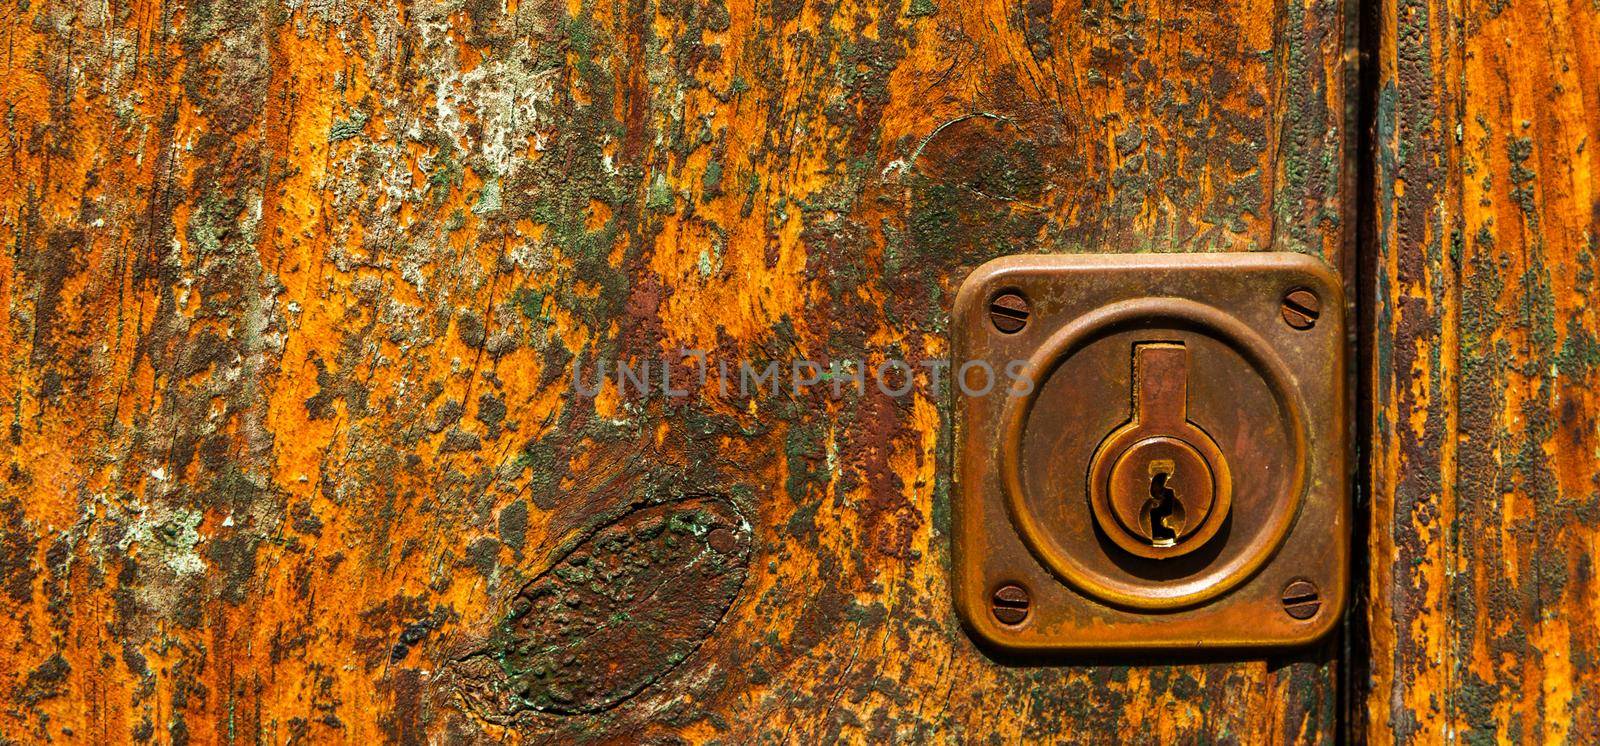 close up on the old lock with an interesting texture on the door, home security by Q77photo